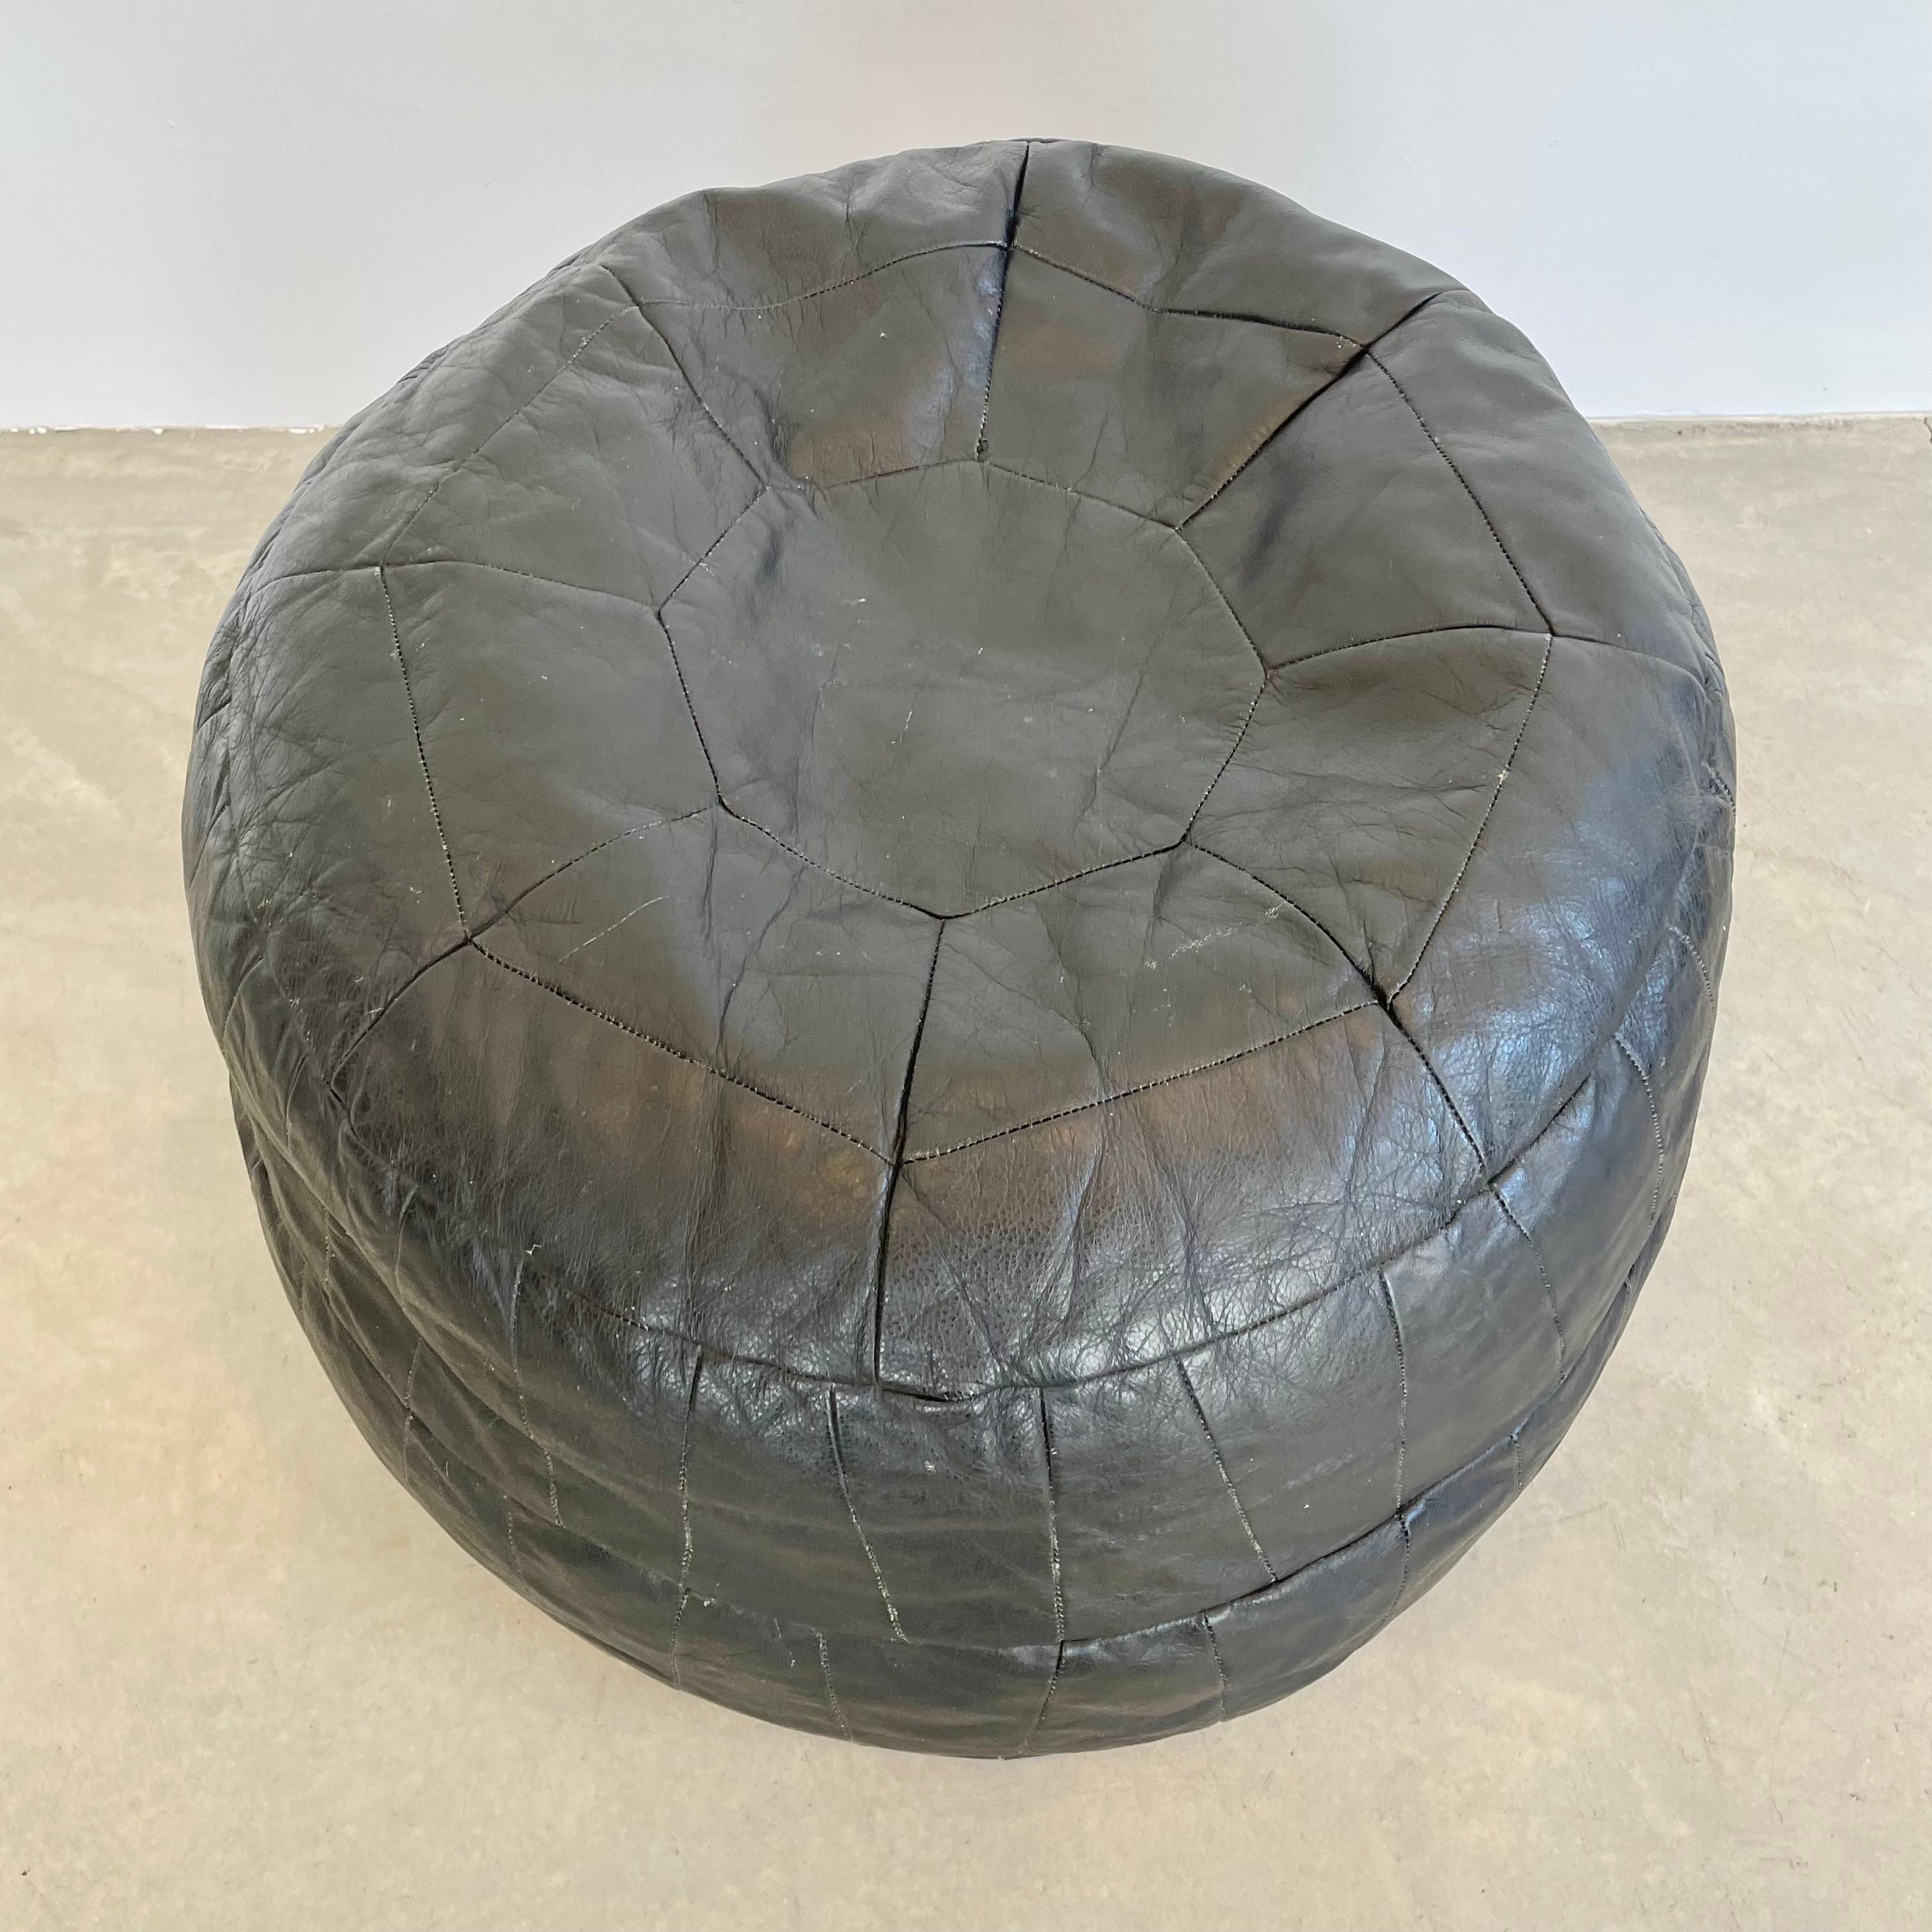 Sophisticated black leather pouf/ottoman by Swiss designer De Sede with triangular patchwork and a final octagonal leather patch at the top. This pouf is in a slightly larger size. Handmade with wonderful faded patina. Gorgeous accent piece. Good